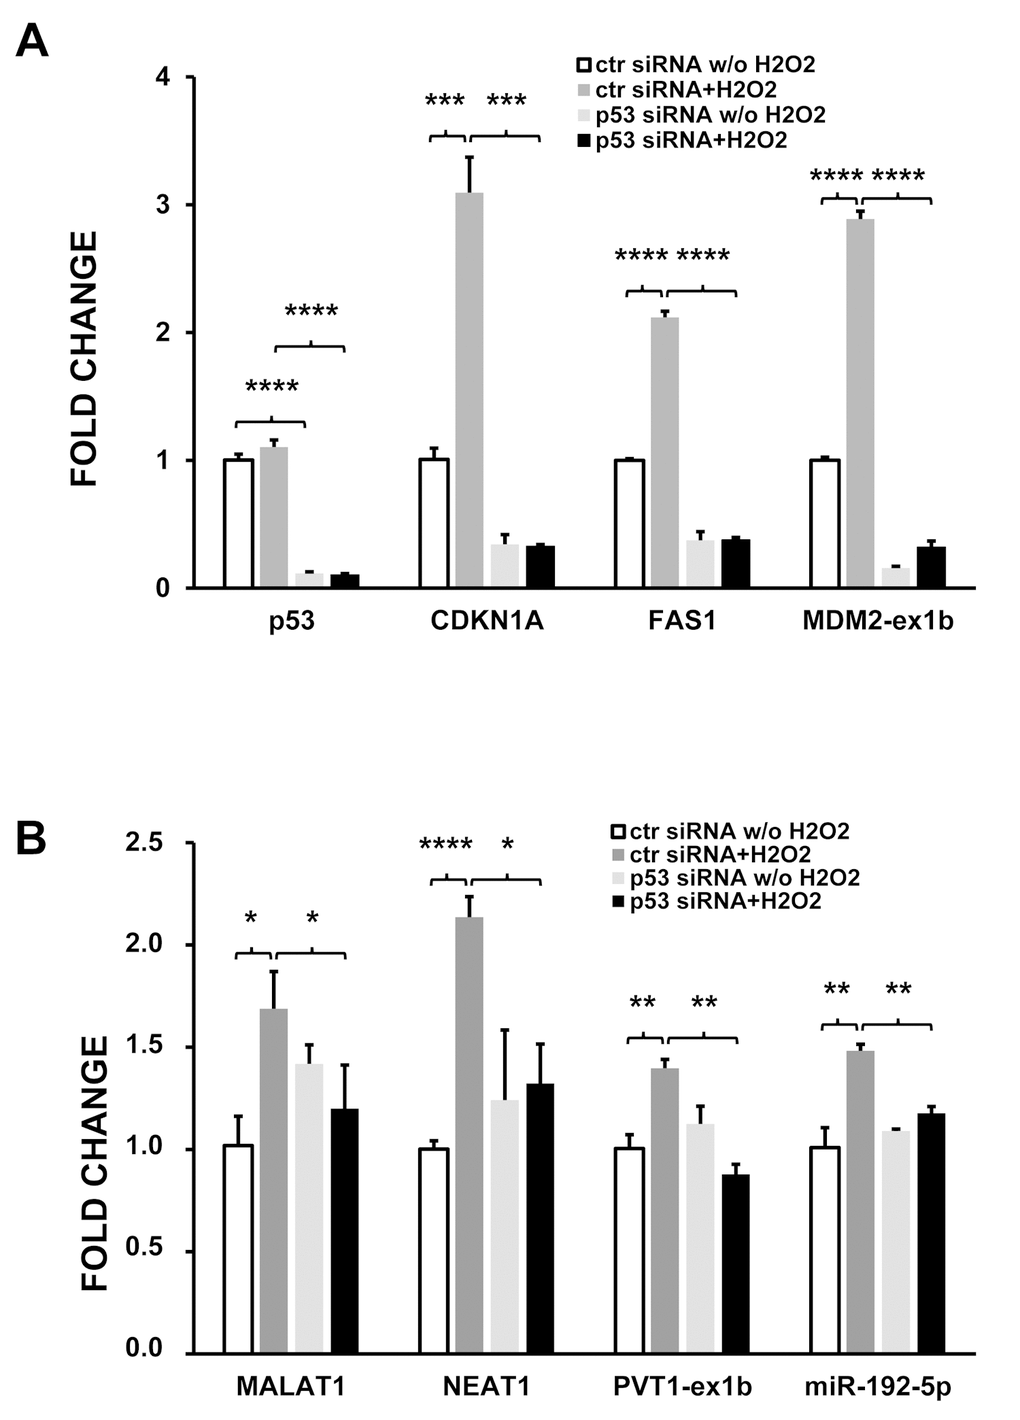 p53 silencing inhibits the induction of target ncRNAs by H2O2. HUVEC were transfected with p53 or control (ctr) siRNAs and, 24 hrs later, treated with either 200 μM H2O2 or solvent alone. After 16 hrs, total RNA was extracted and the indicated RNAs analyzed by qPCR. (A) coding RNAs; (B) ncRNAs. The bar graphs show average fold changes ±SEM of the indicated RNAs referred to untreated cells transfected with control siRNA (n= 3; *p